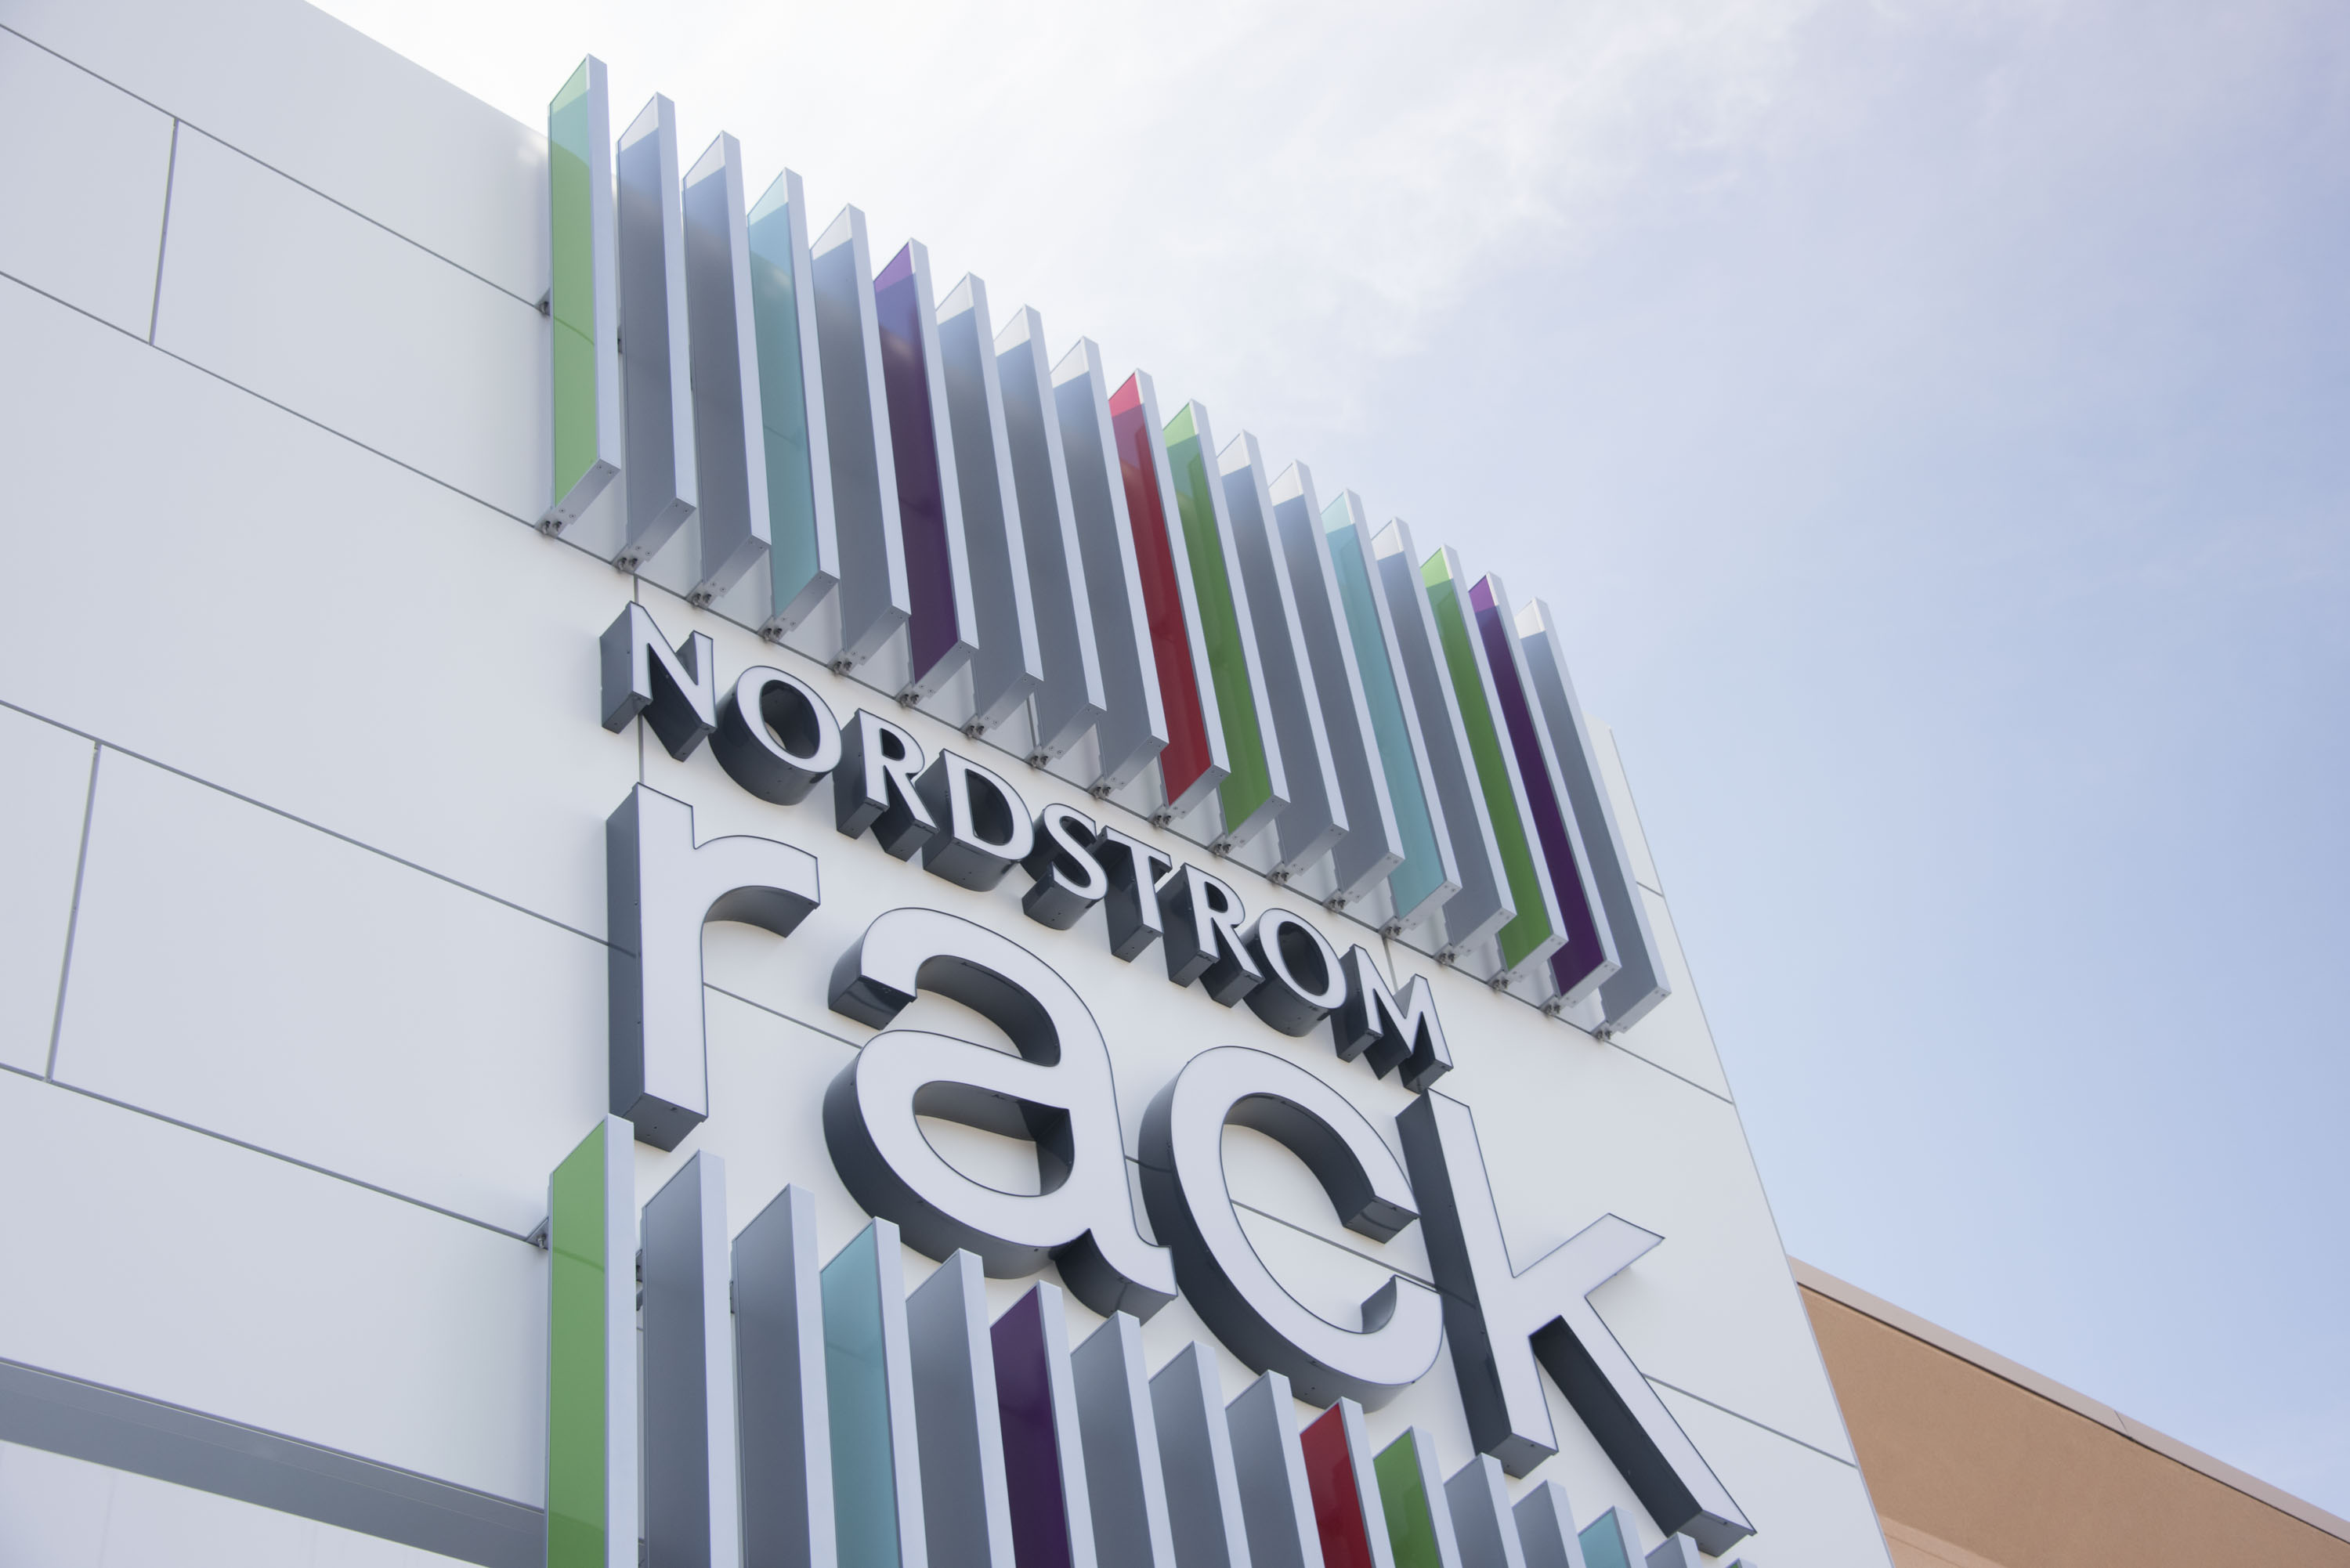 Nordstrom Rack to open location in Best of the West shopping center